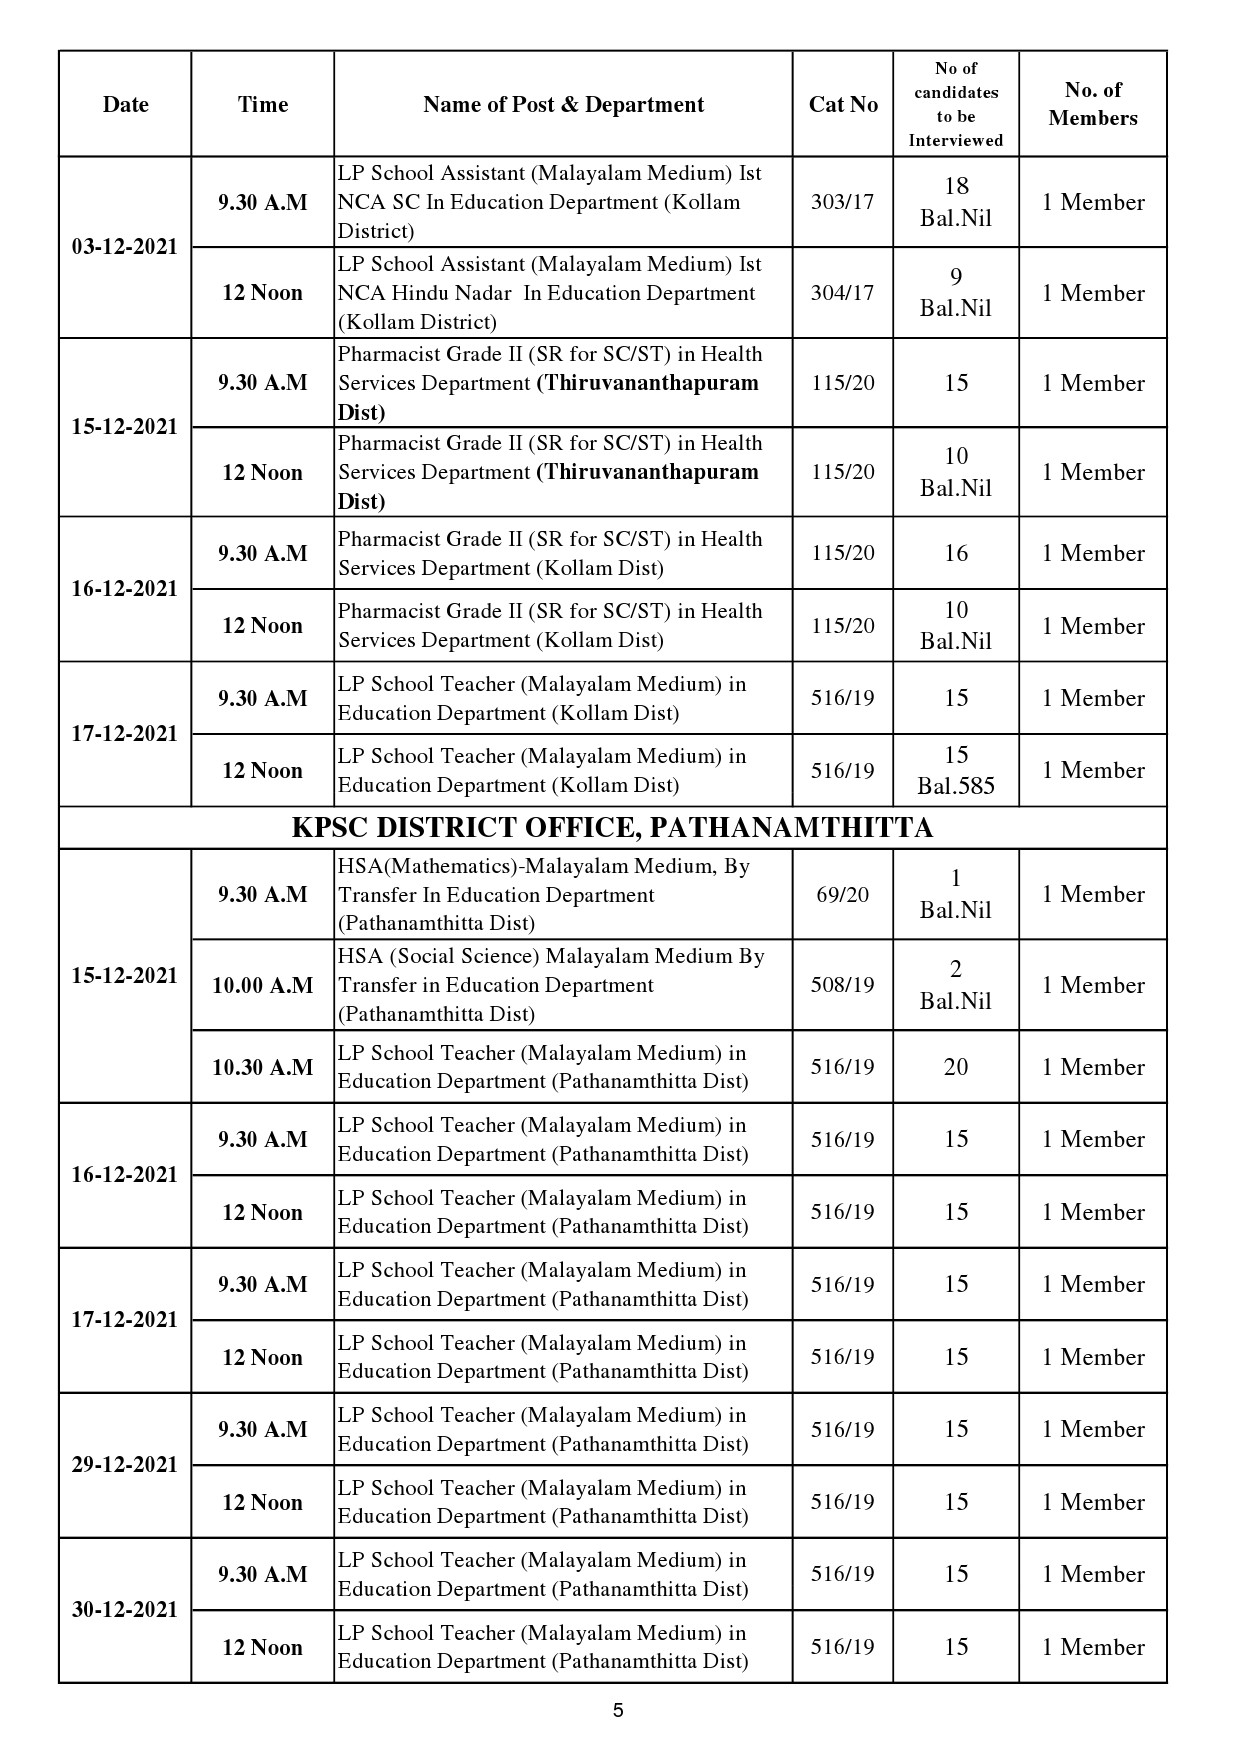 KPSC Interview Programme For The Month Of December 2021 - Notification Image 5